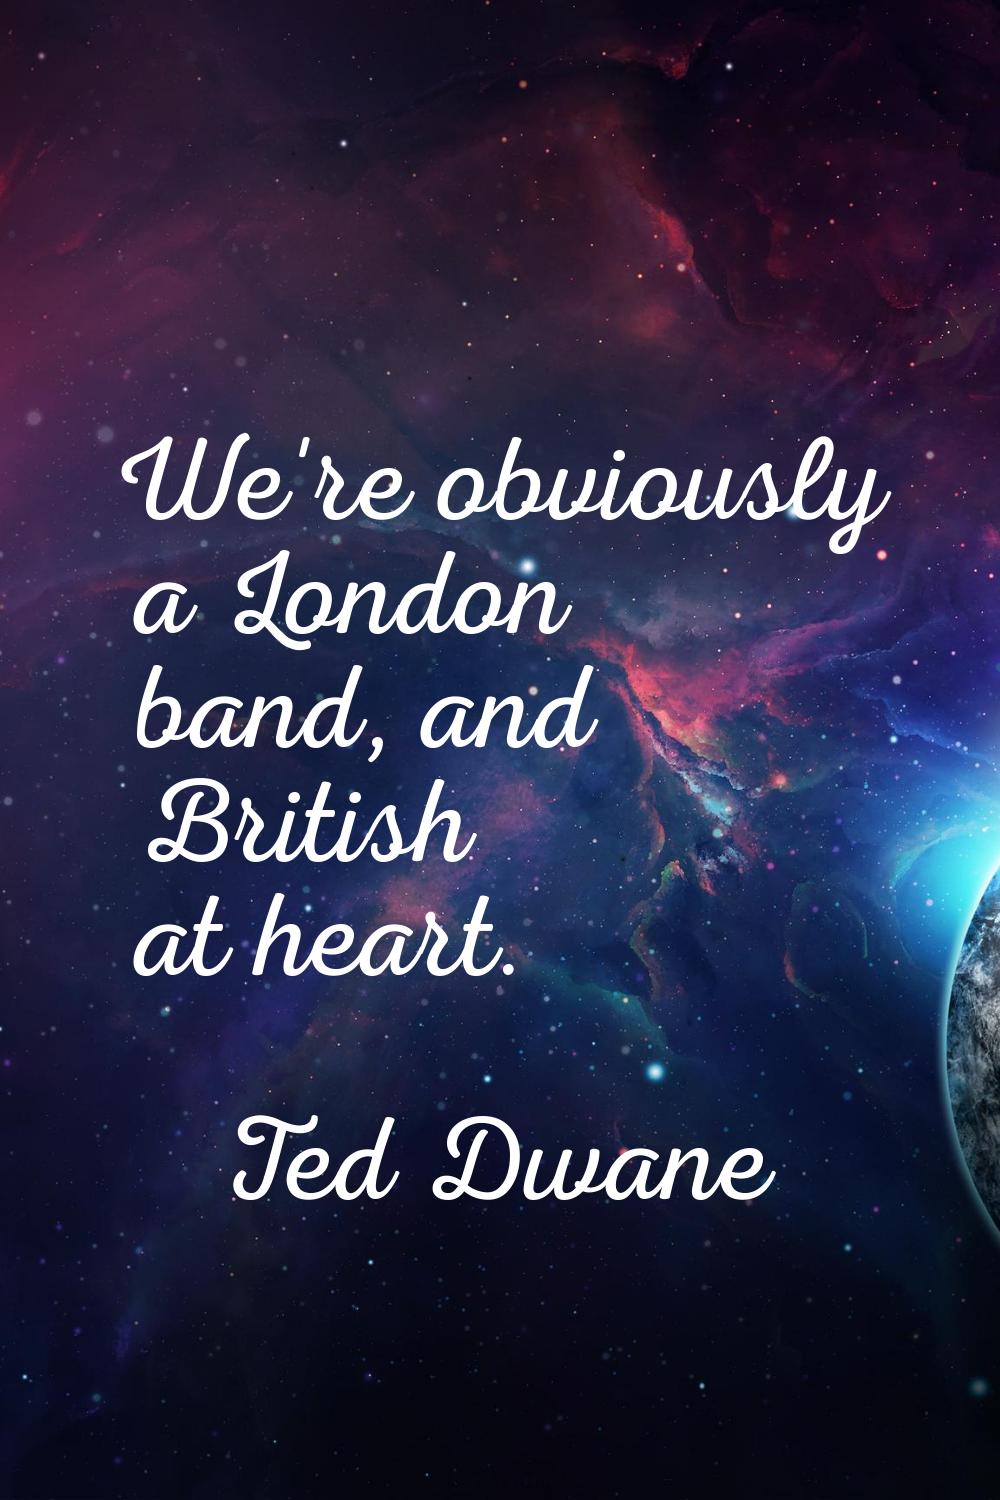 We're obviously a London band, and British at heart.